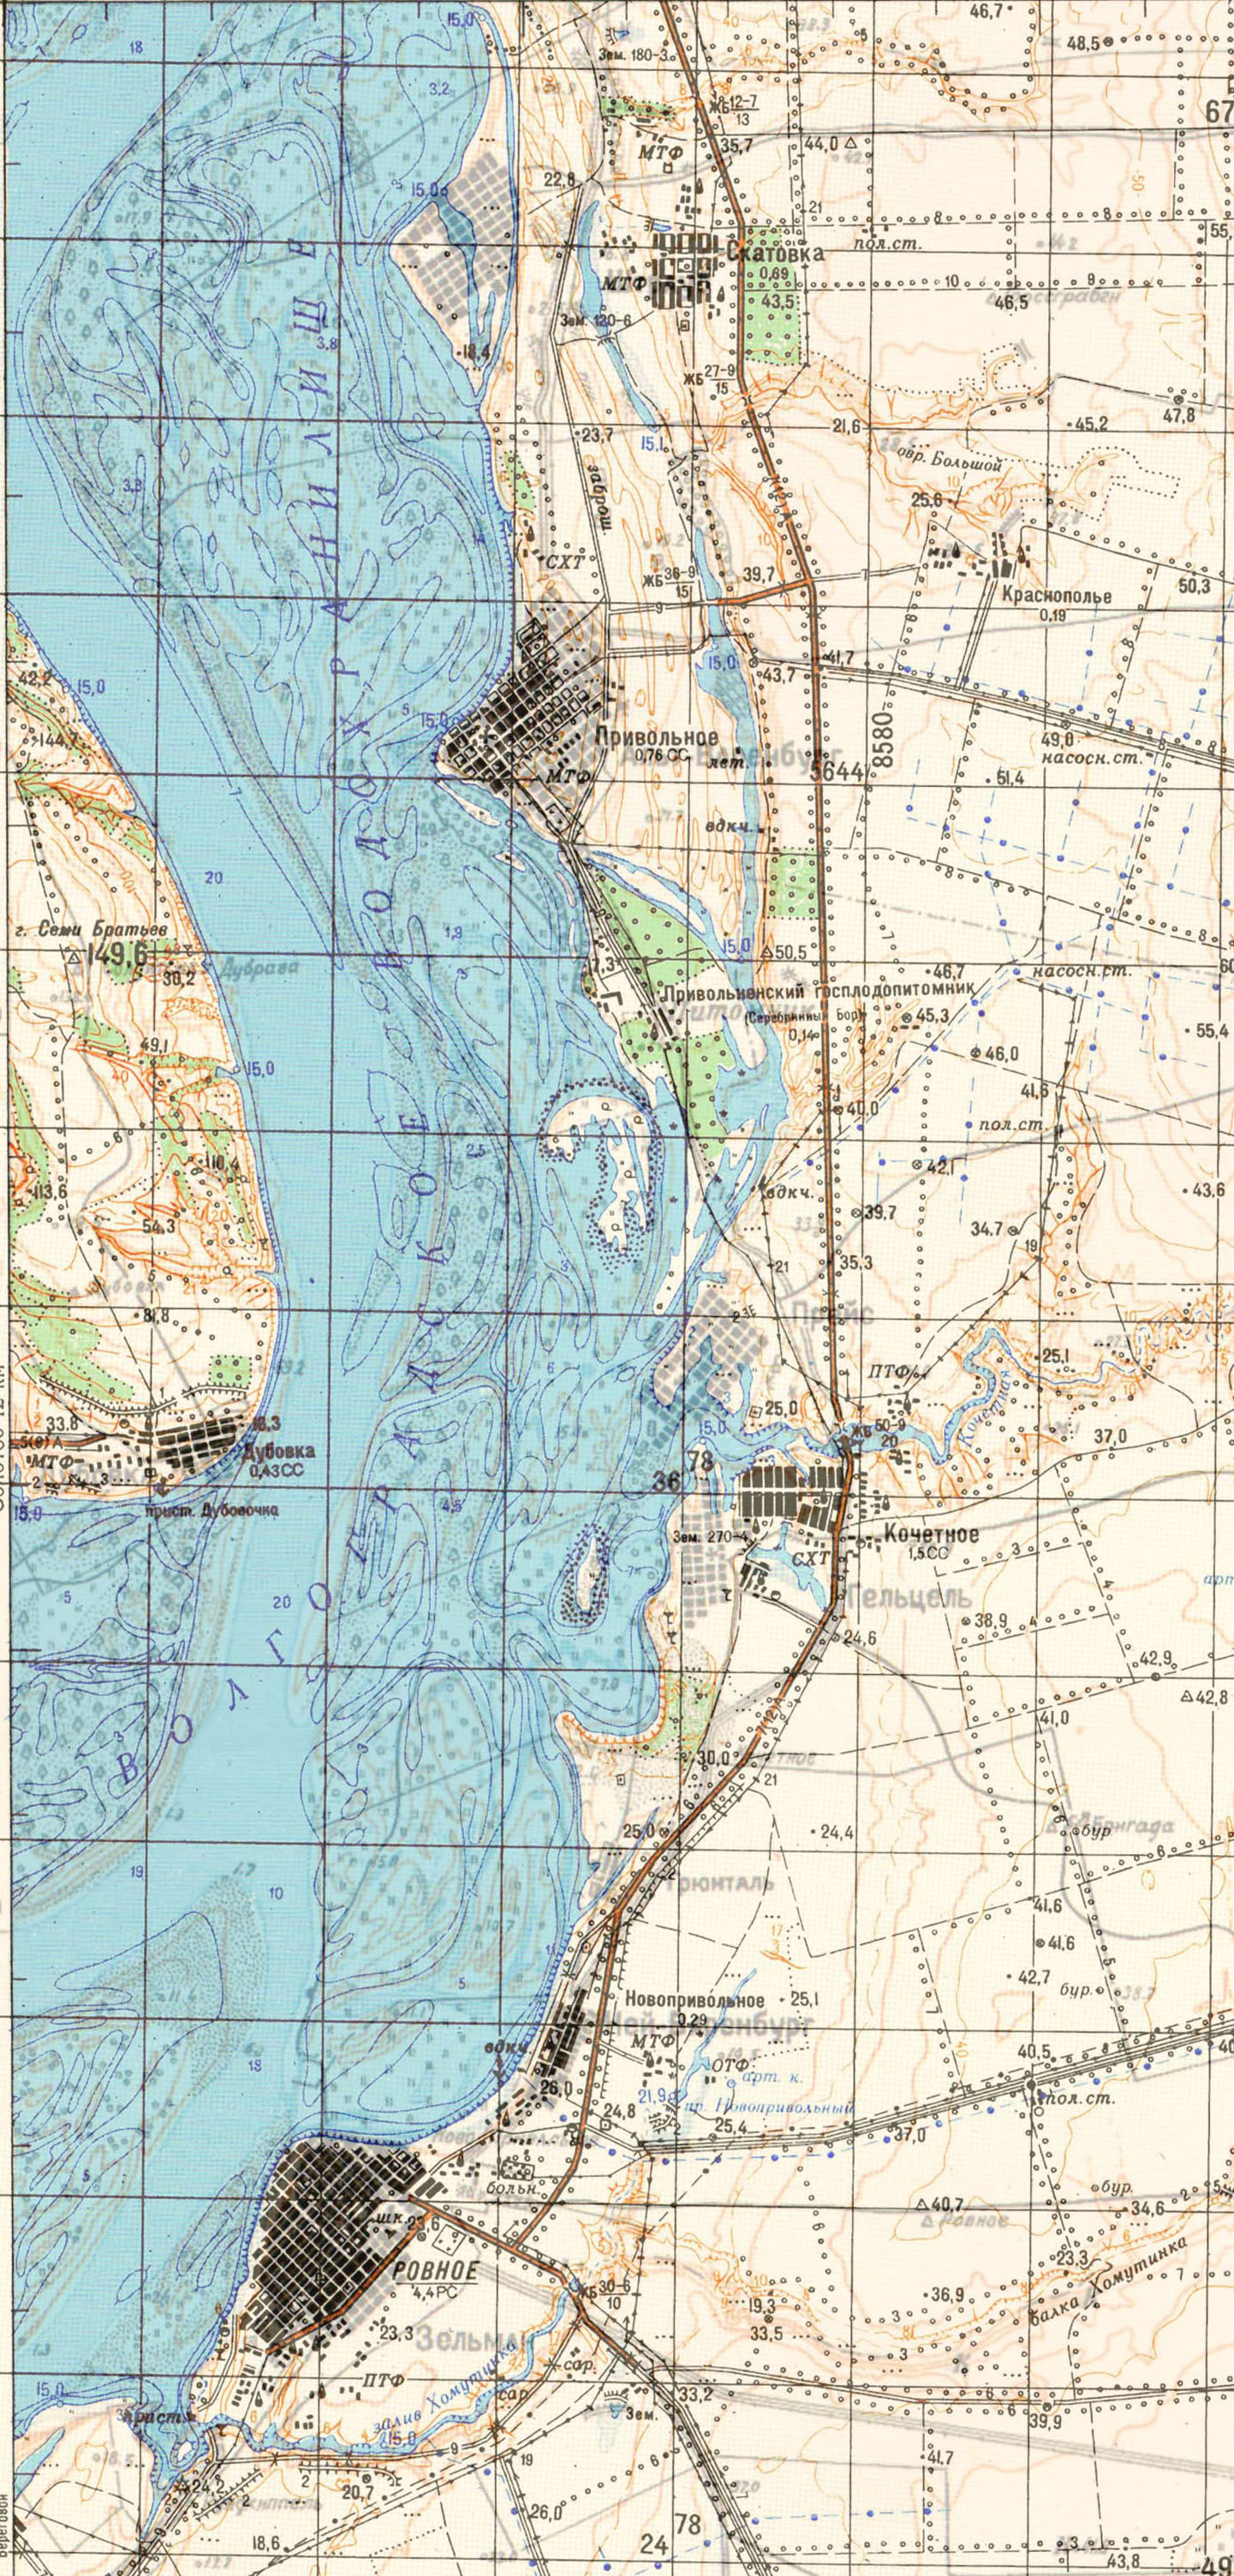 This map overlays several maps that show the location of Grüntal (about a quarter of the way up from the bottom) before the inundation of the Volga Reservoir in 1961. Source: Vladimir Kakorin.